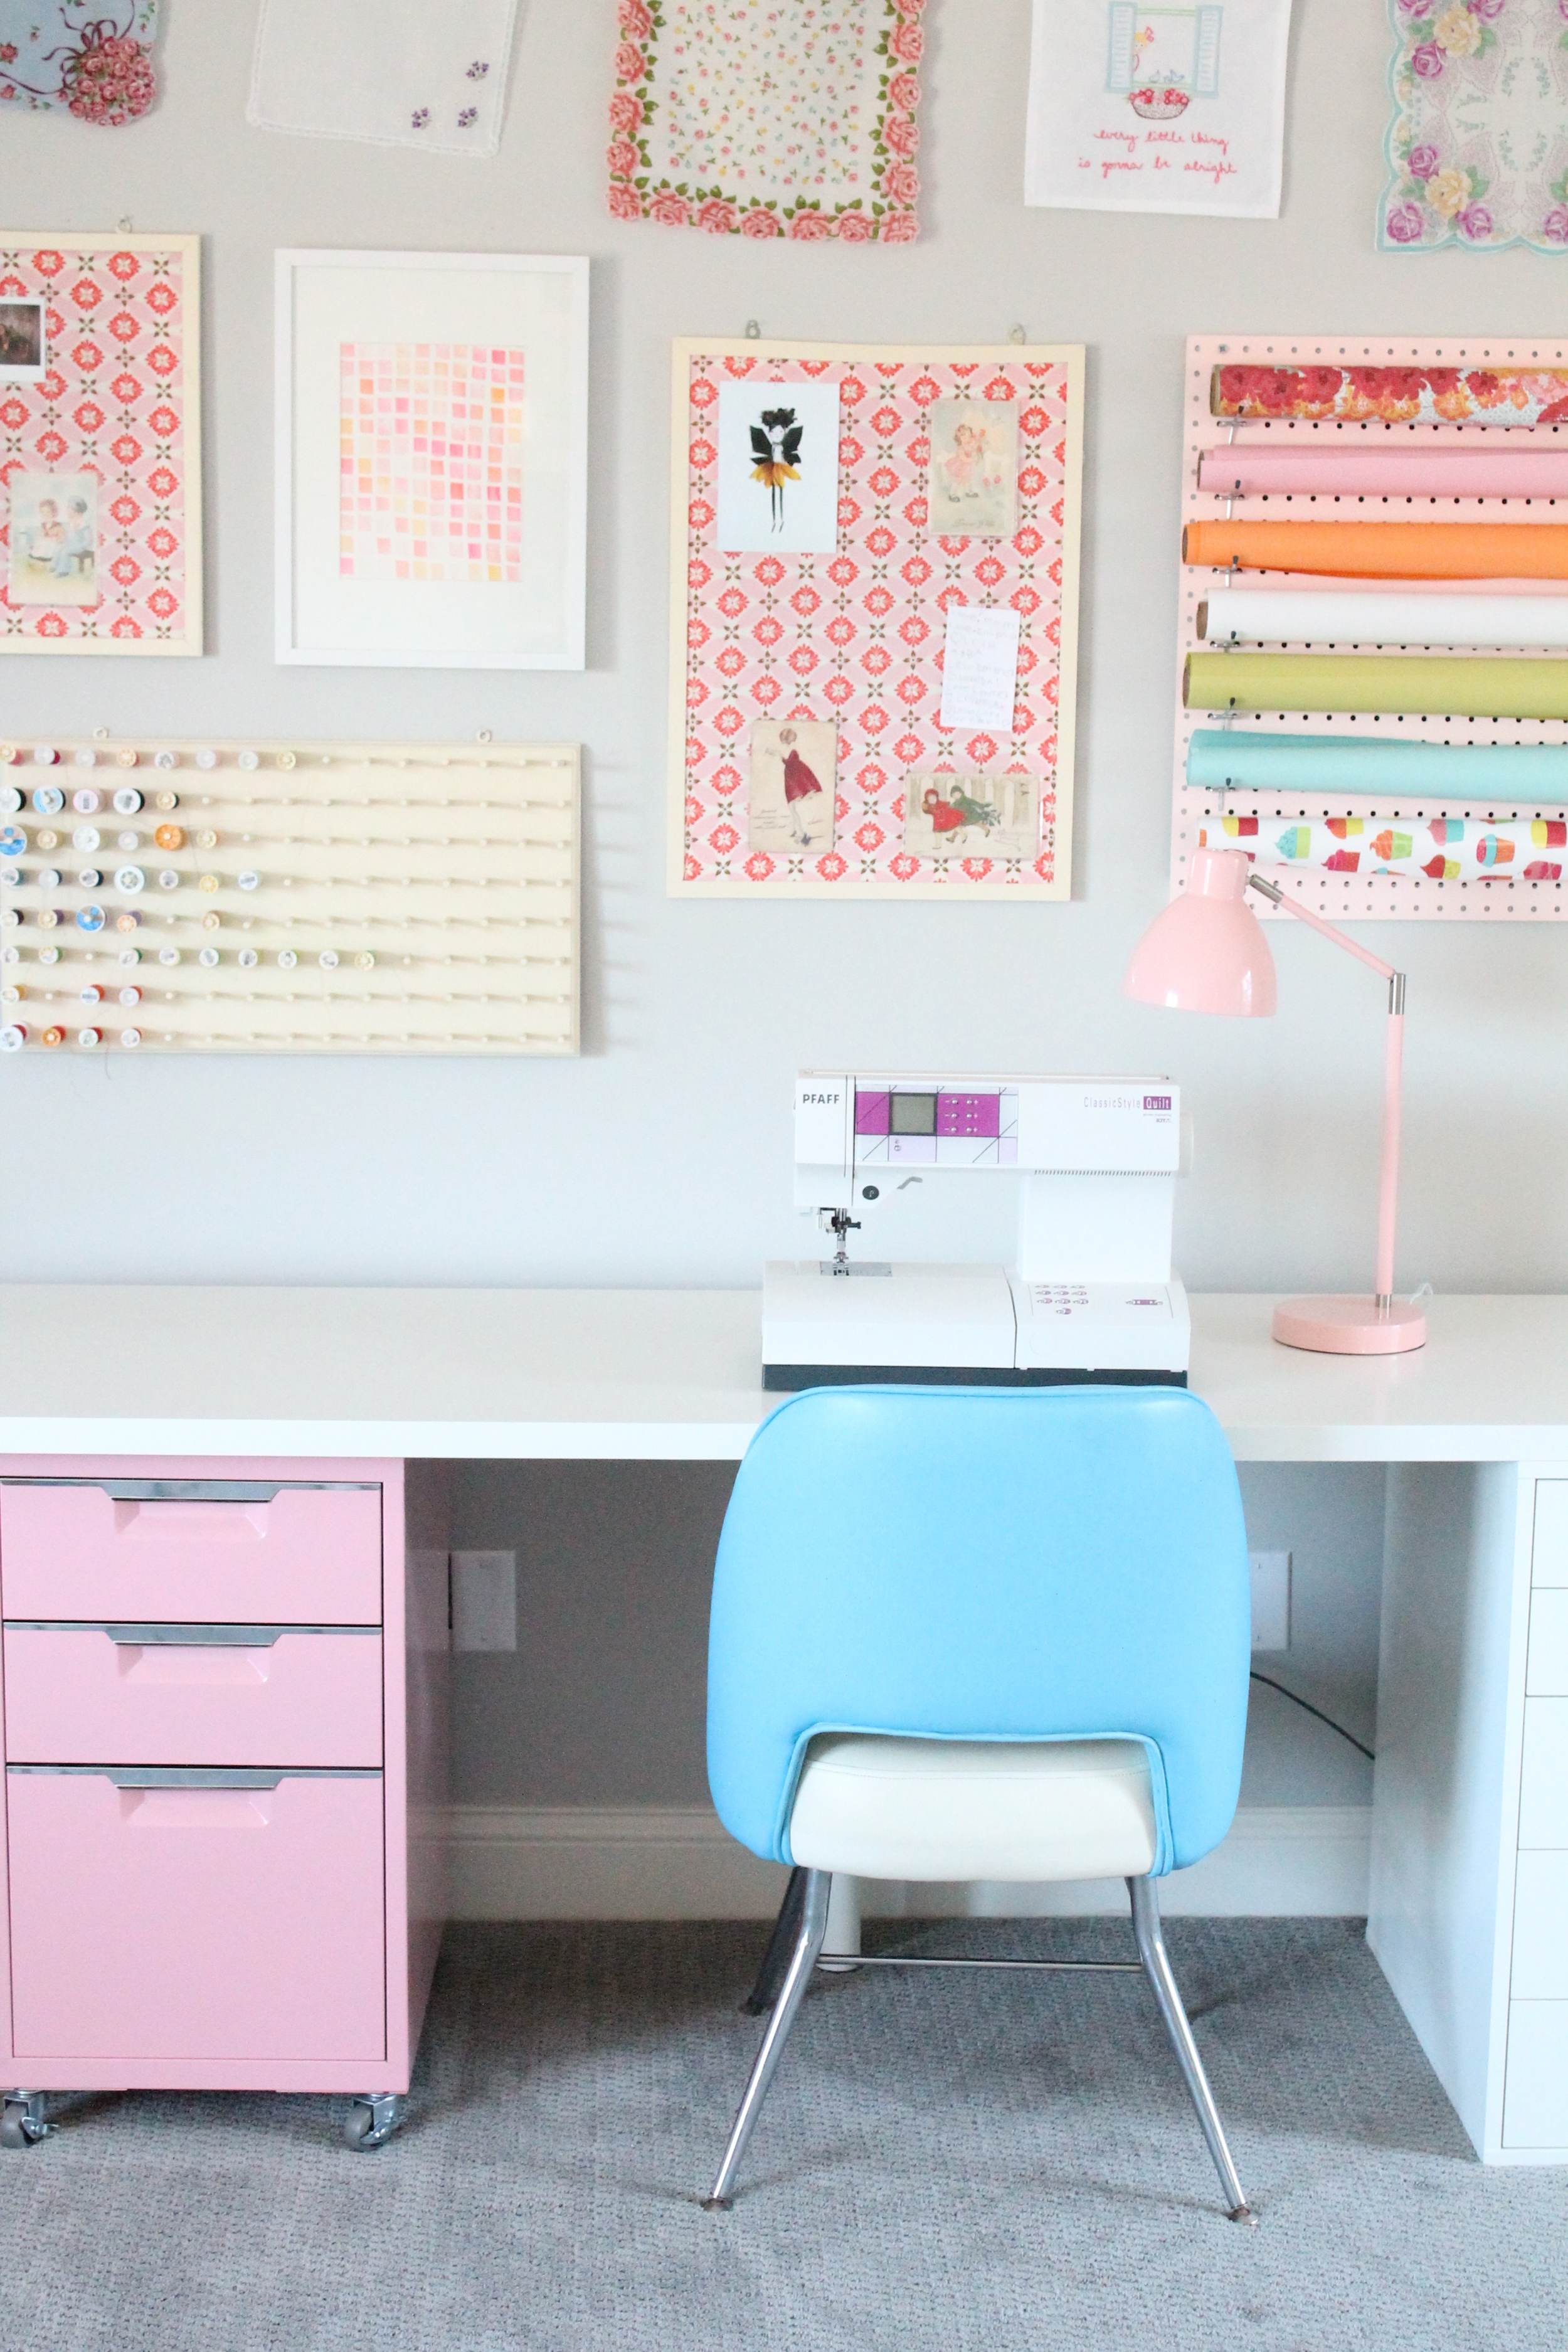 Family Craft Studio. Love how everyone in the family can share this creative space. A perfect craft room for sewing, scrapbooking, wrapping presents or just reading a book.